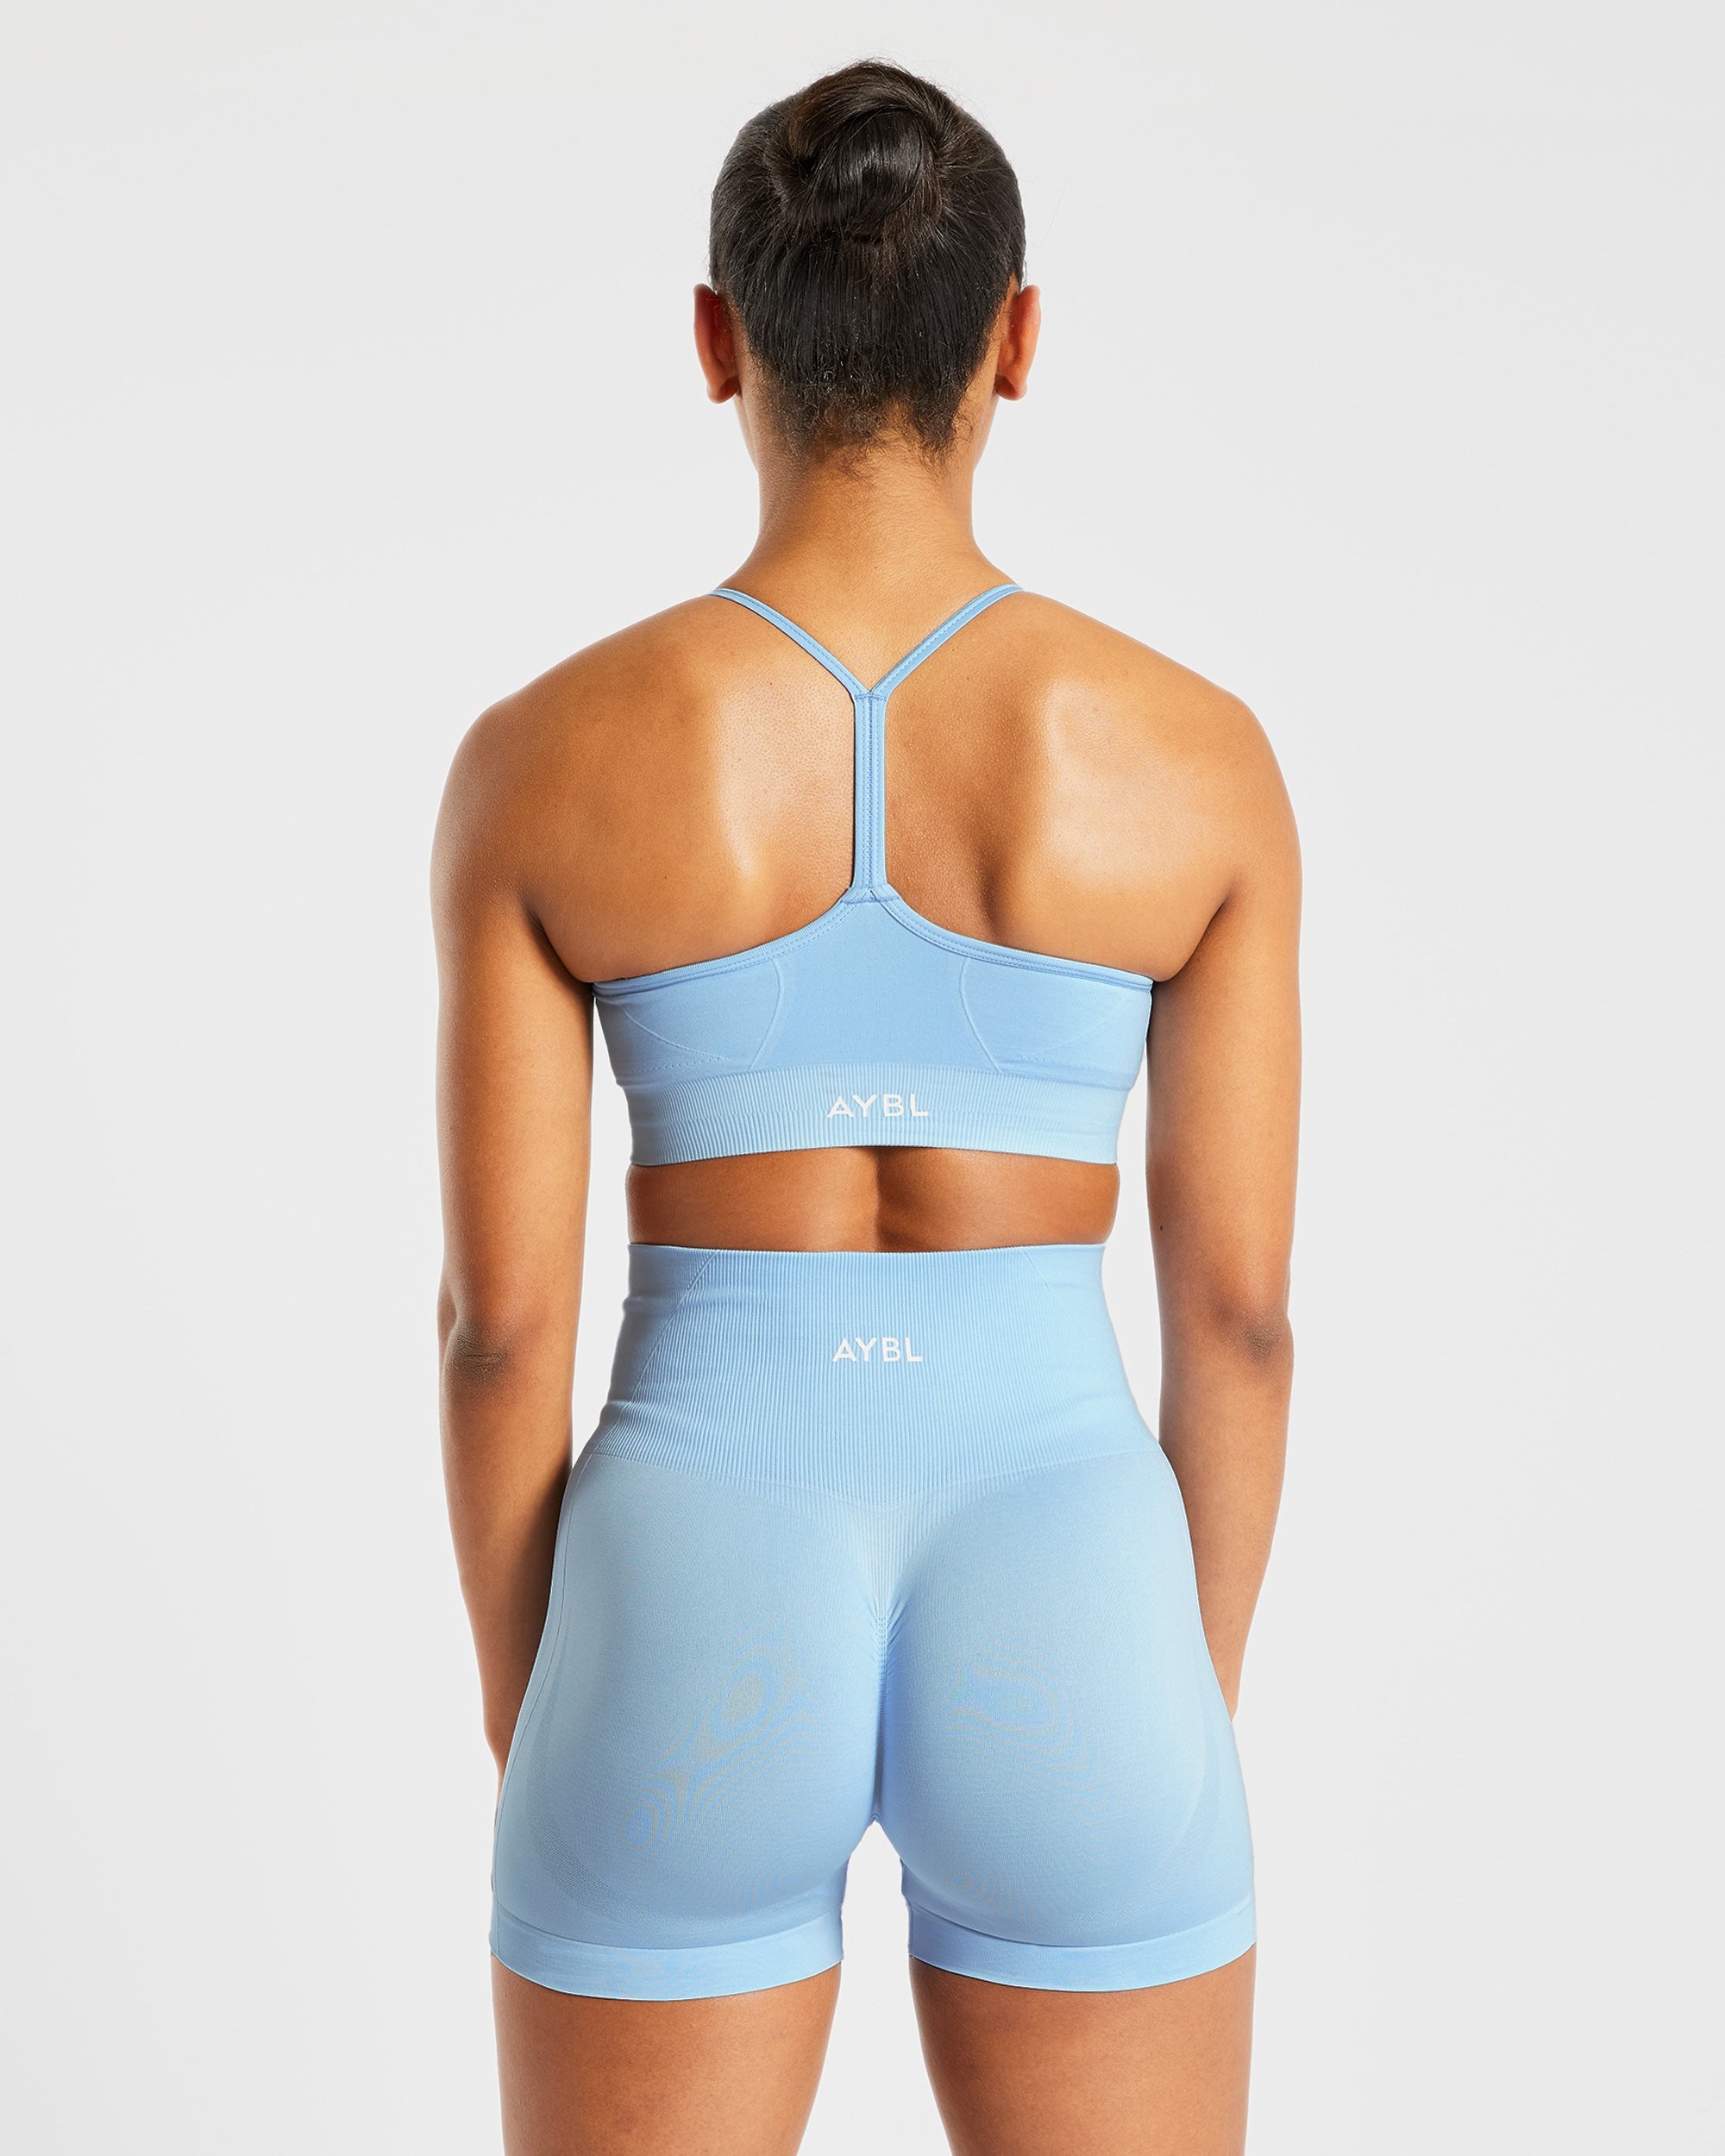 AYBL Empower Seamless Leggings - $45 New With Tags - From Yulianasuleidy